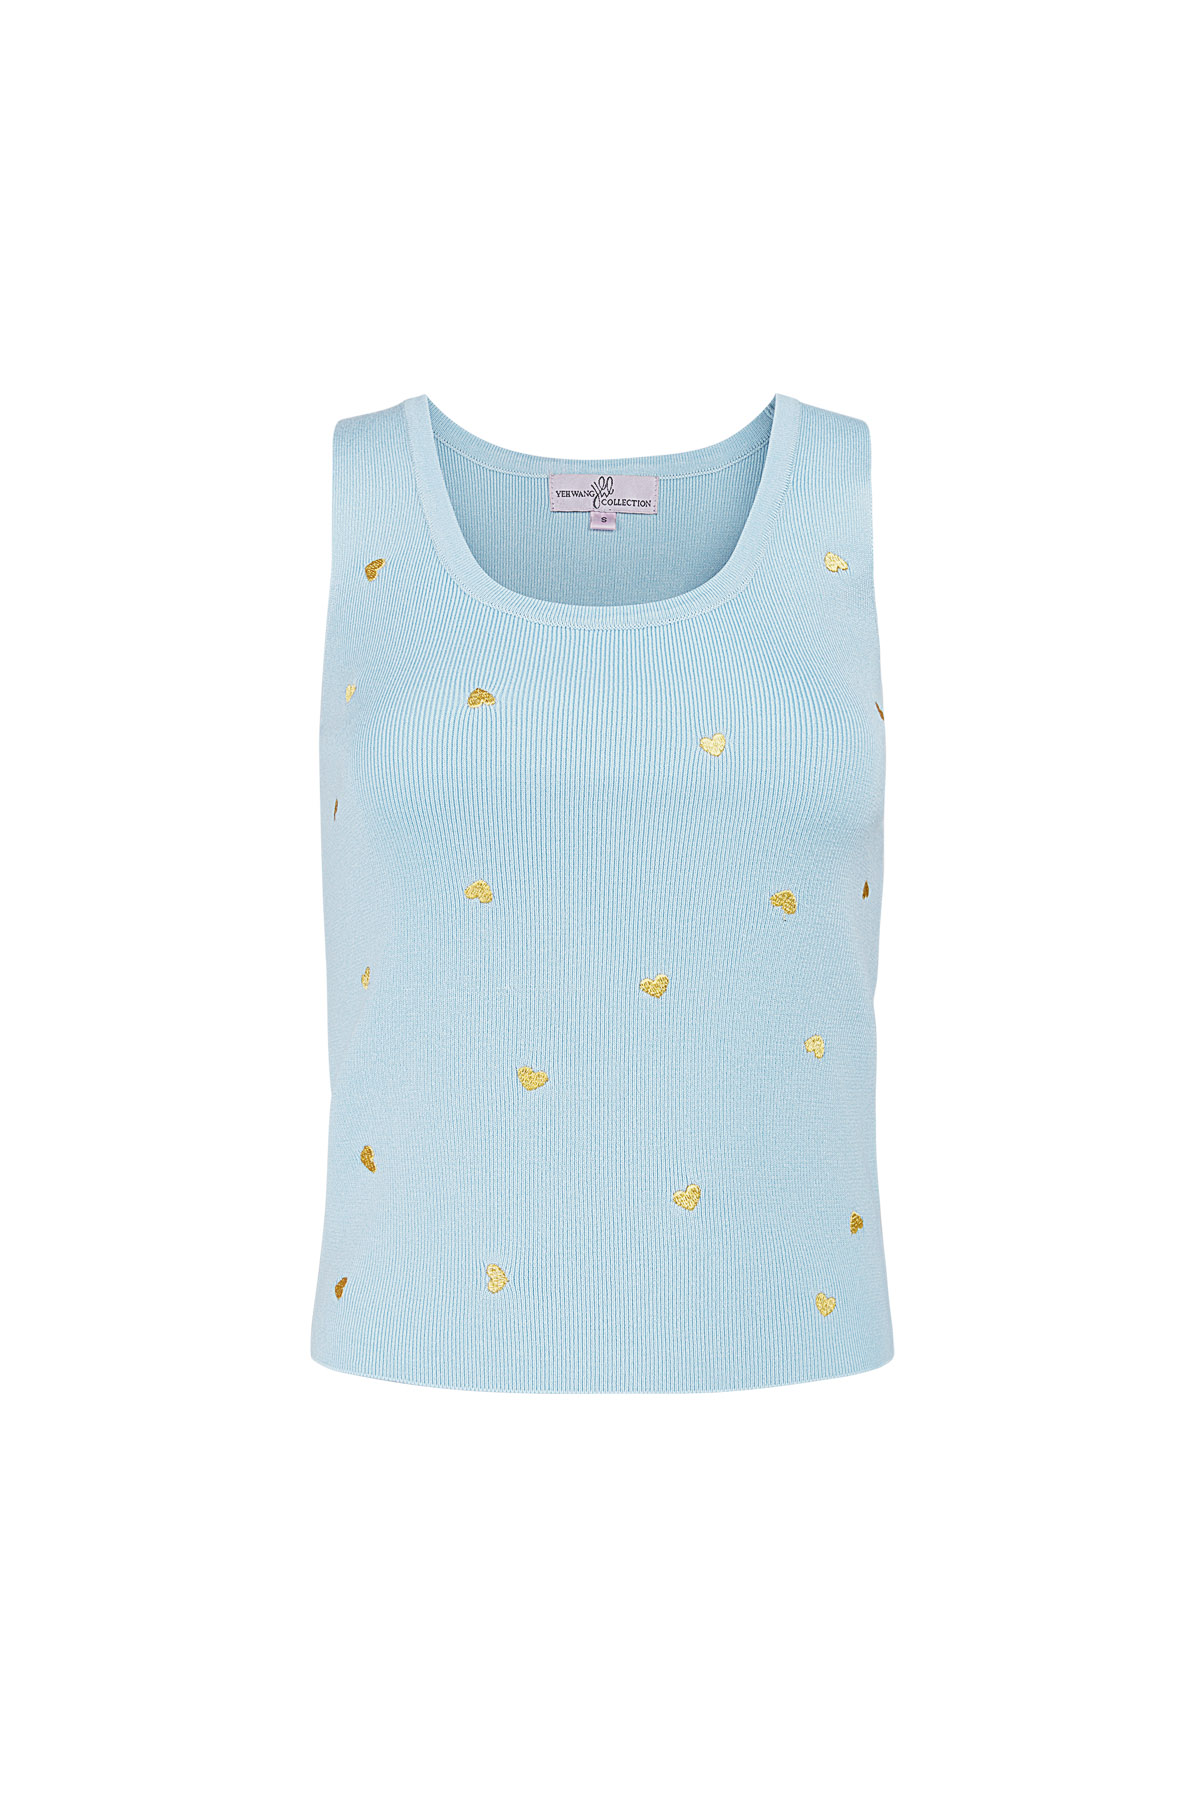 Sleeveless top with gold heart details large - blue h5 